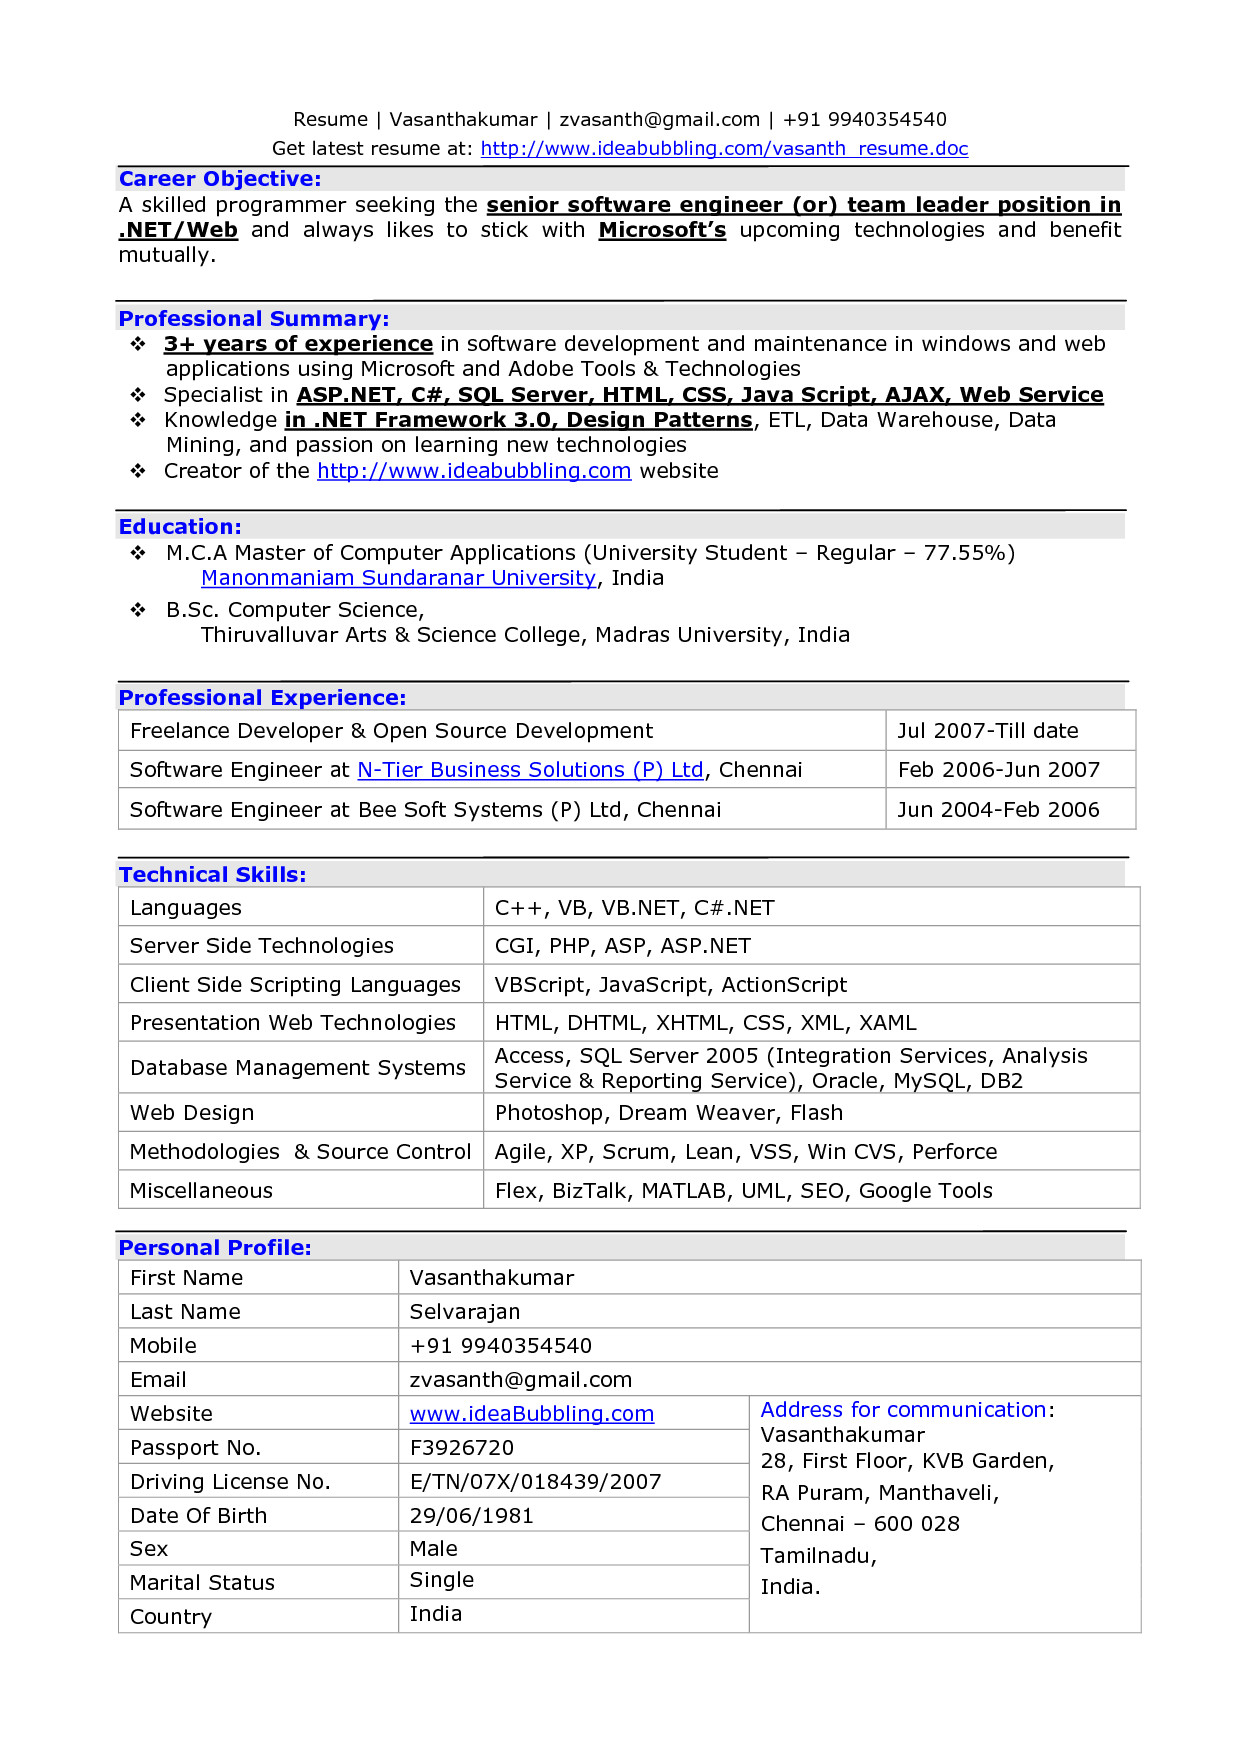 resume format for experienced software